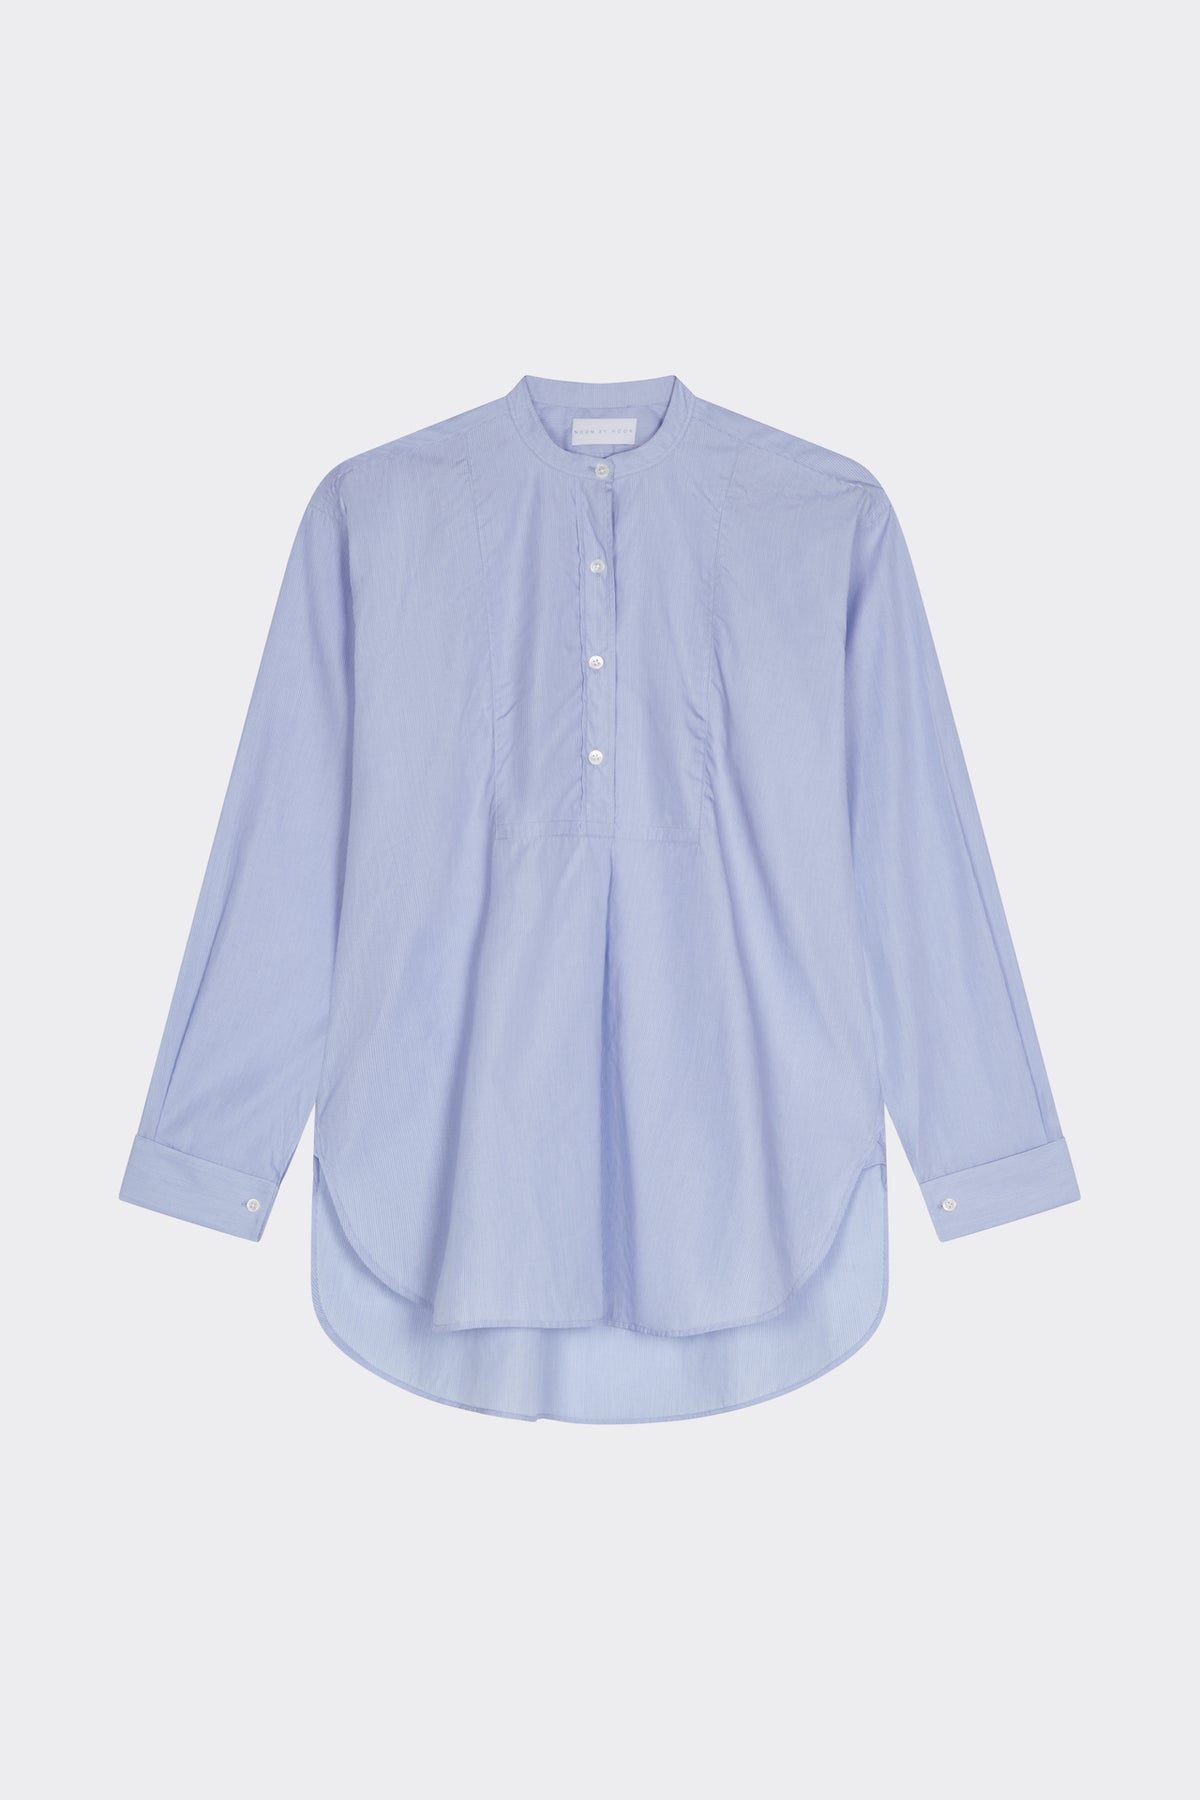 Emilia Shirt in Blue White | Noon By Noor